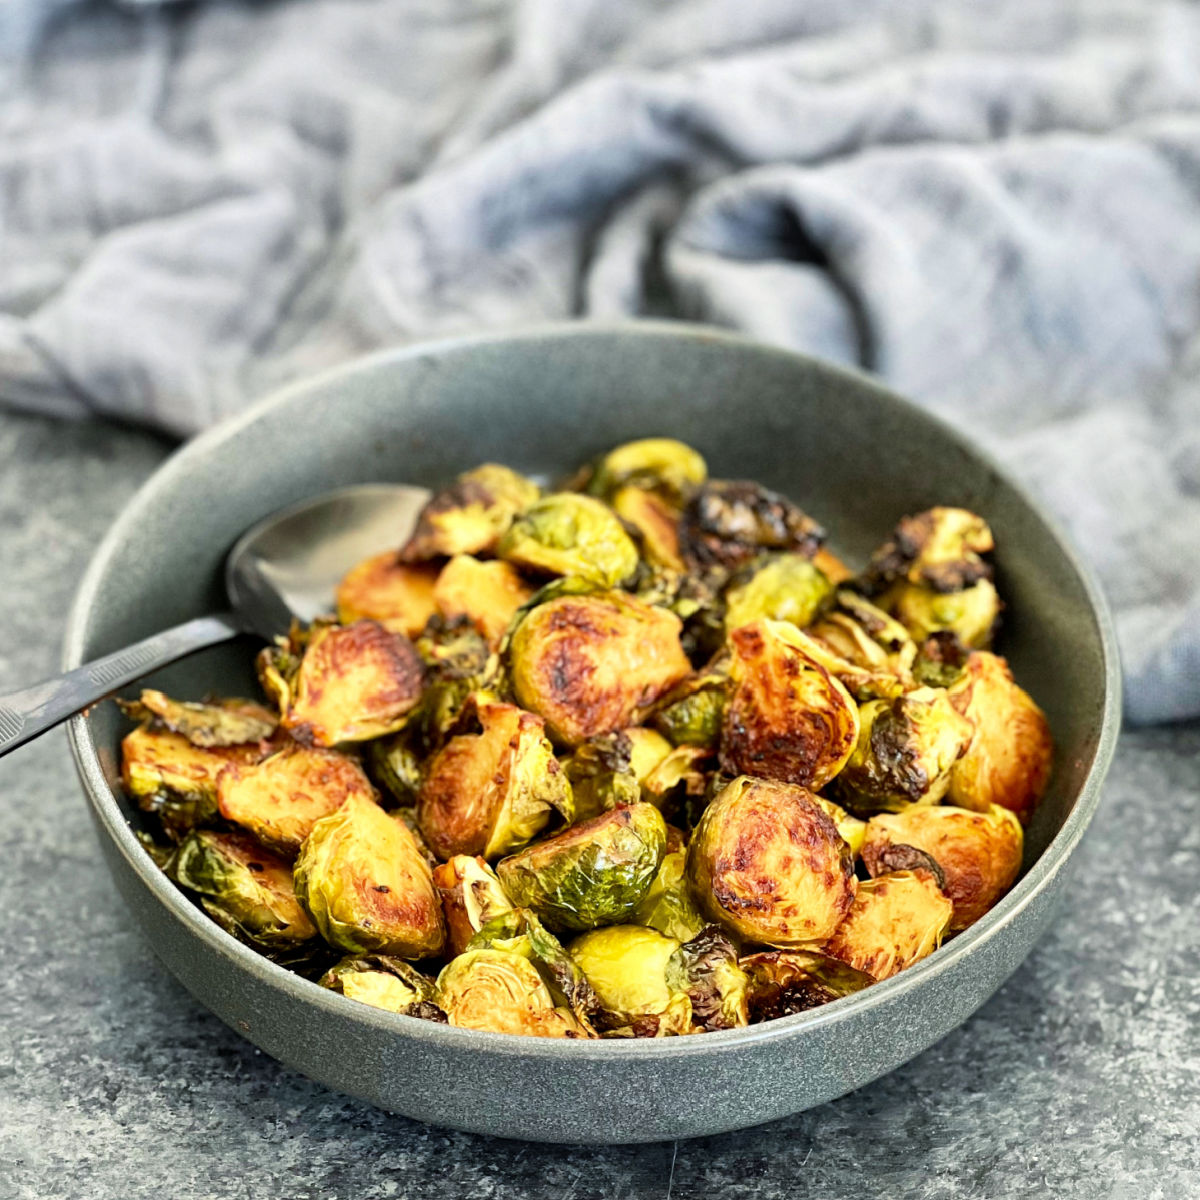 Miso roasted brussels in a gray bowl.